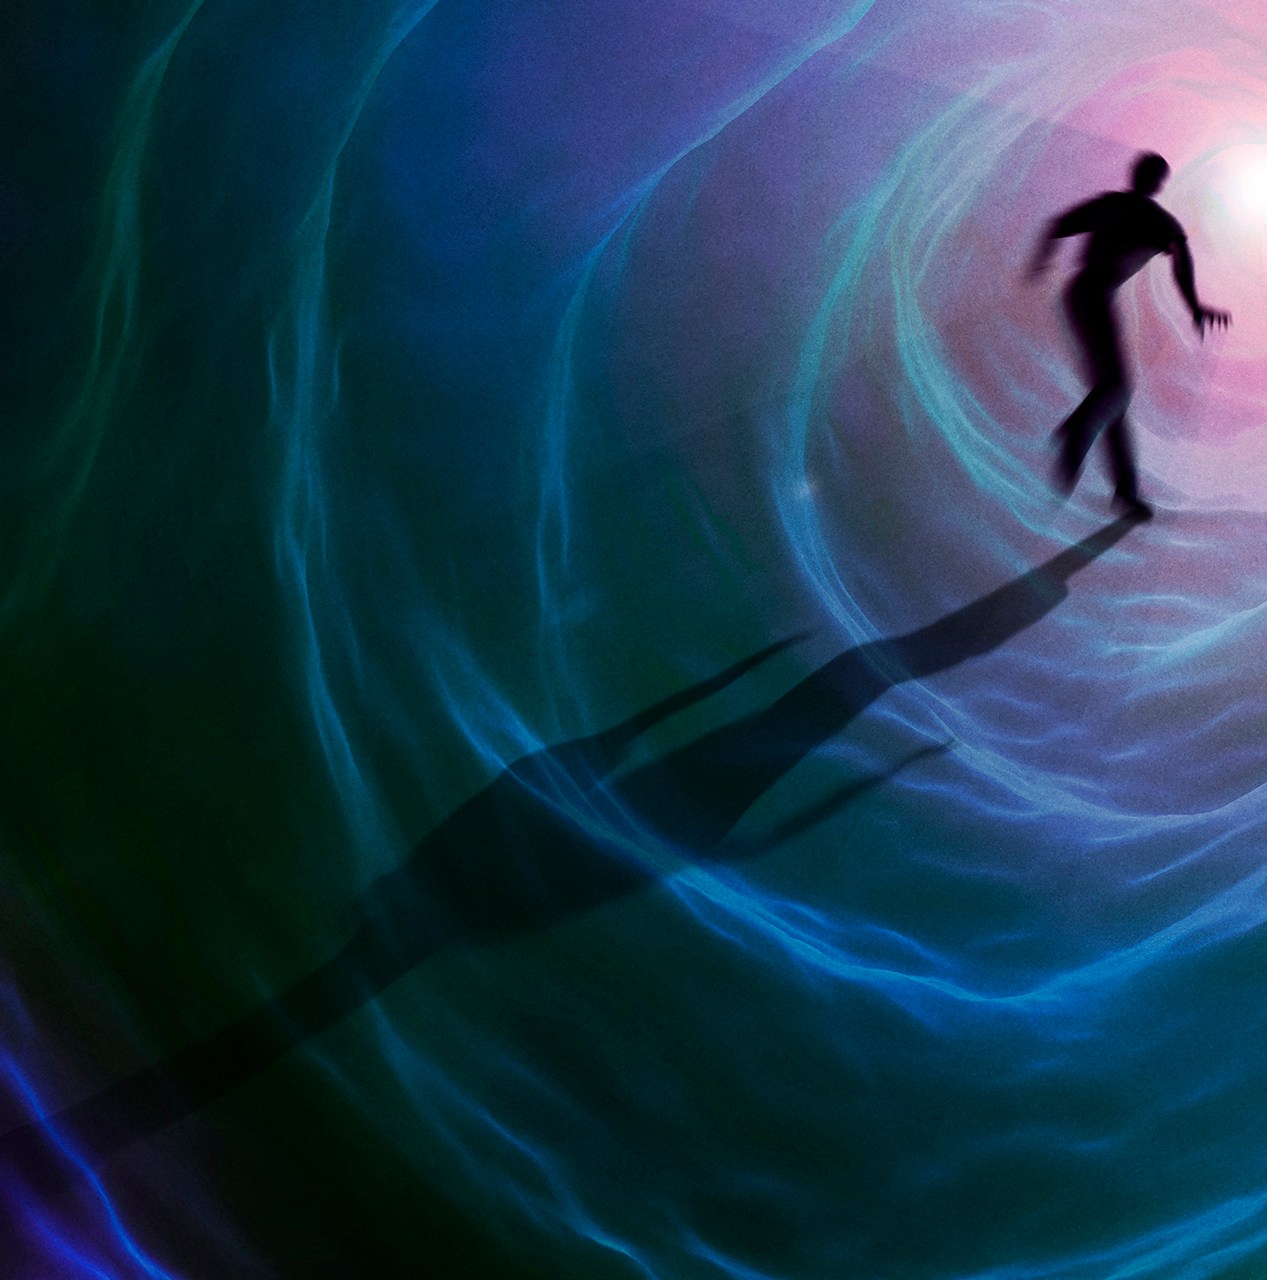 The science of near-death experiences